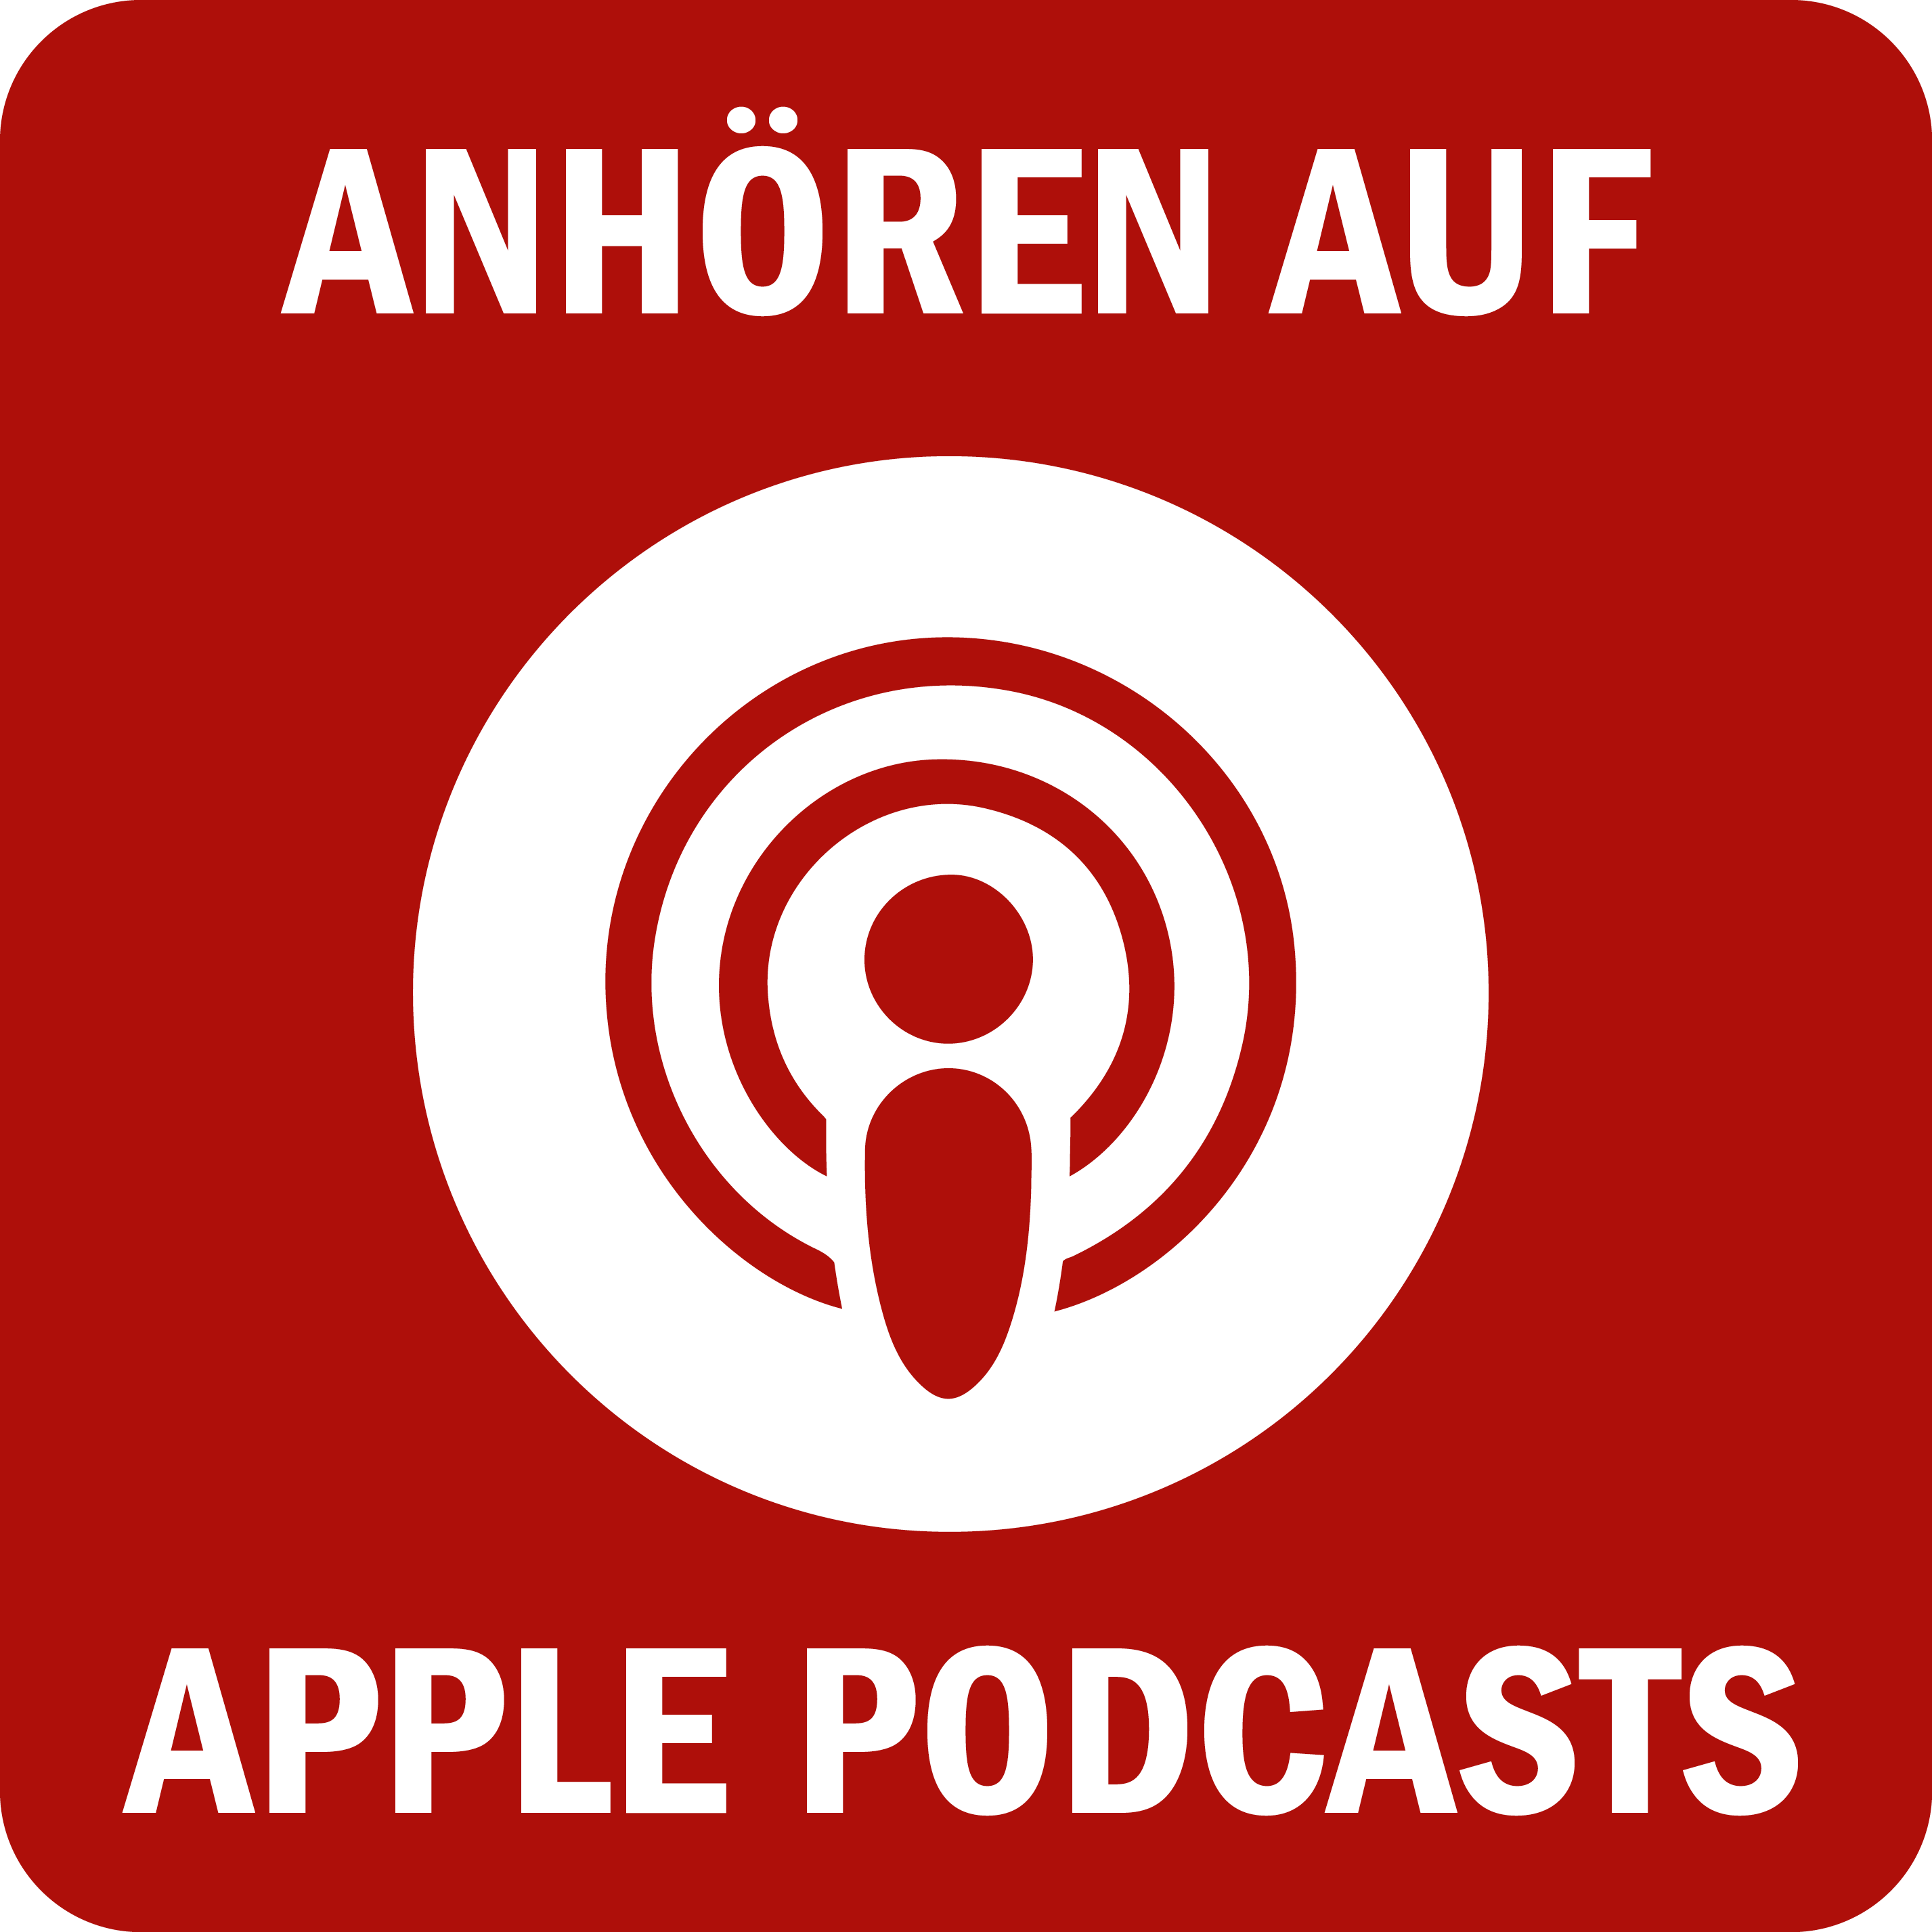 Link to Apple Podcasts